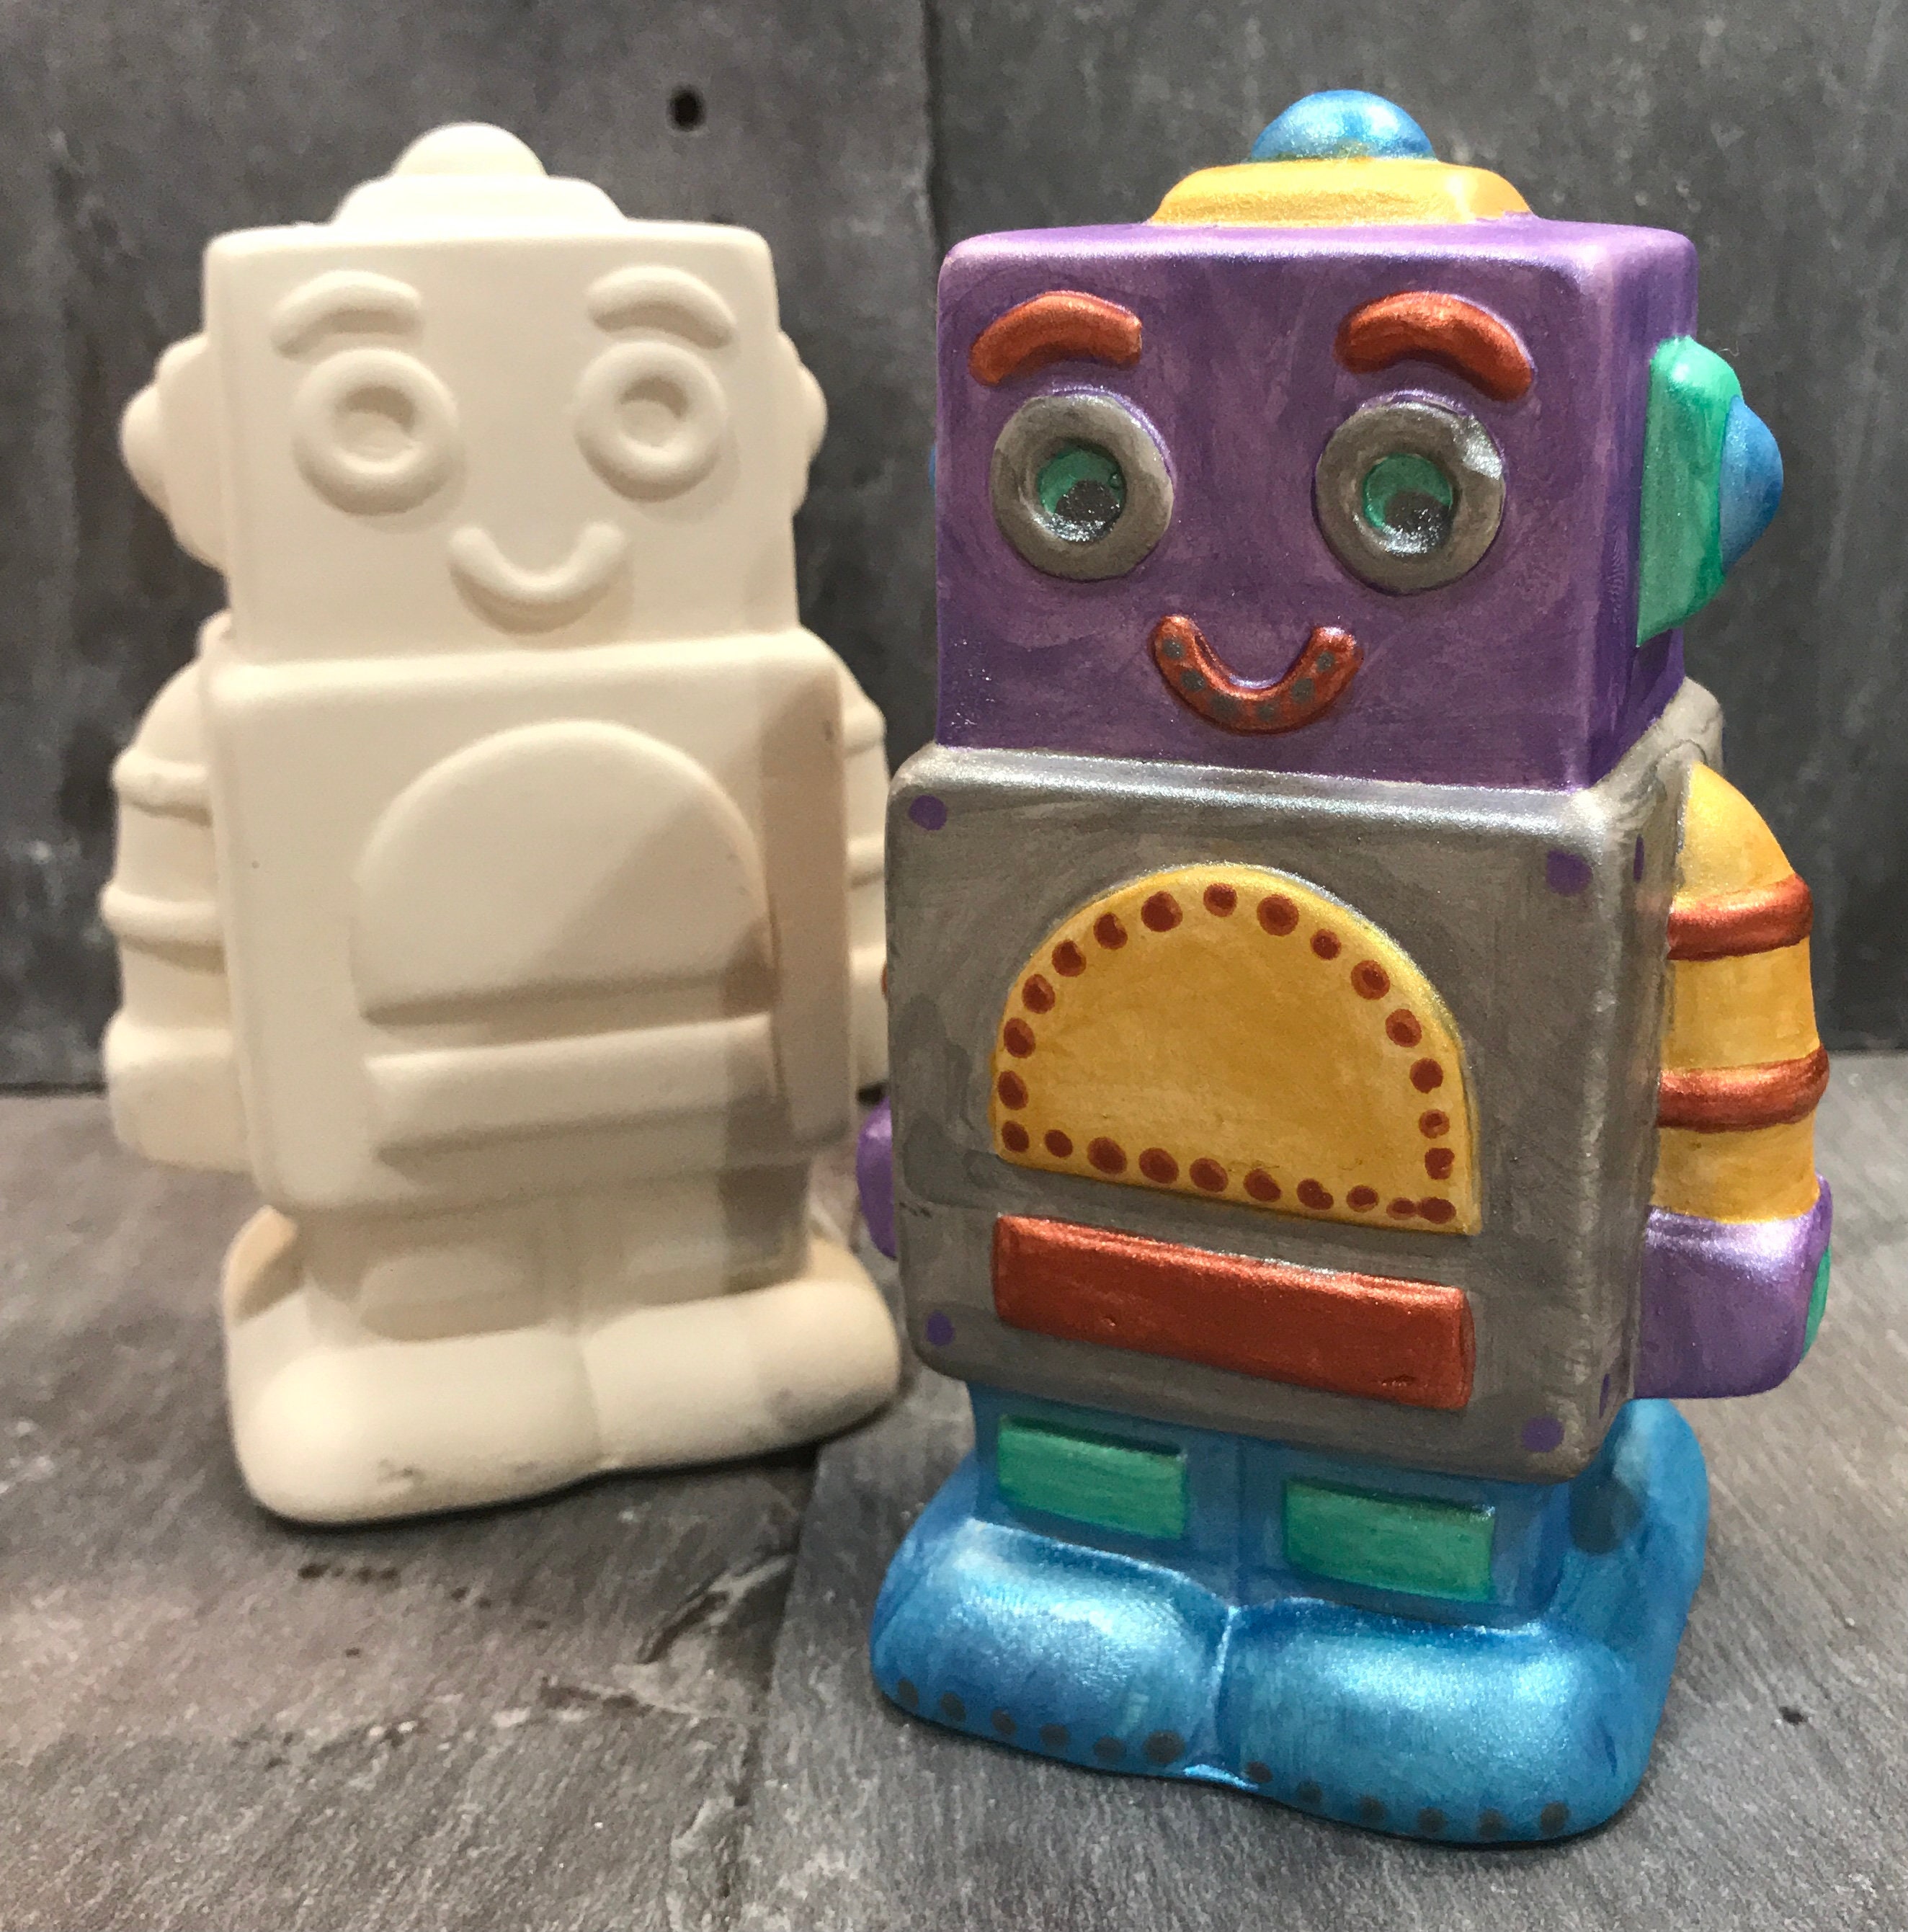 Robot Ceramic Coin Bank Paint Your Own Ceramics Pottery - Etsy